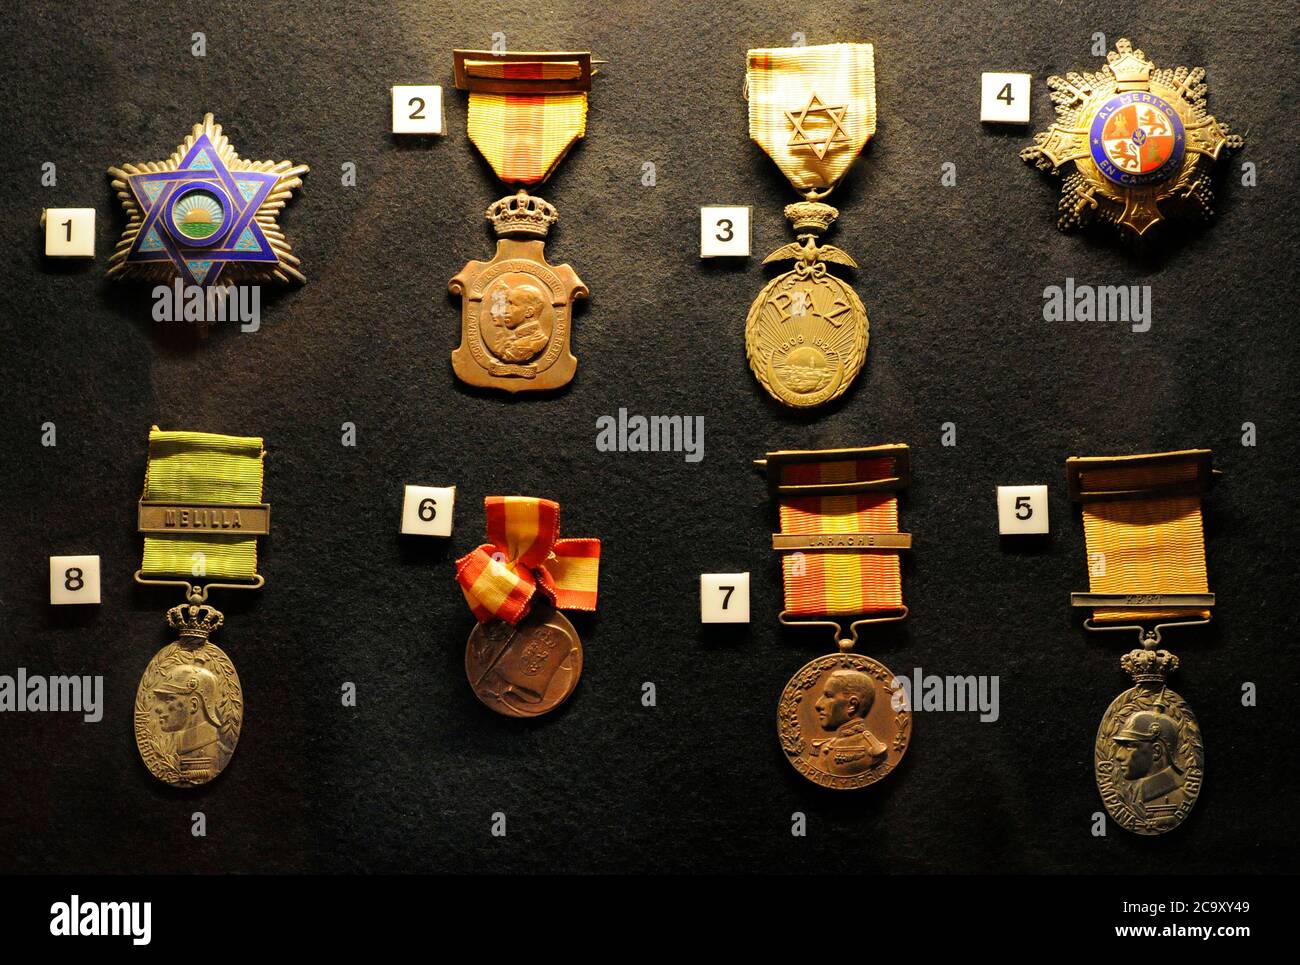 Spanish military decorations: 1. Plate of the Commander in the Mehdavian Order. August 18, 1926. Belonging to Admiral Alejandro Molins; 2. Medal of homage of the City Councils to the Kings (May 17, 1925); 3. Moroccan Peace Medal (November 21, 1927), belonging to Admiral Alejandro Molins; 4. Cross of War (March 29, 1938), belonging to Admiral Alejandro Molins; 5. Medal of the Melilla campaign (March 20, 1910). September 8, 1910. Belonging to Admiral Benitez Inglott; 6. Catalonia Cruiser Medal, 1908; 7. Medal of Africa (September 8, 1912) and 8. Military medal of Morocco (June 29, 1916), belongi Stock Photo